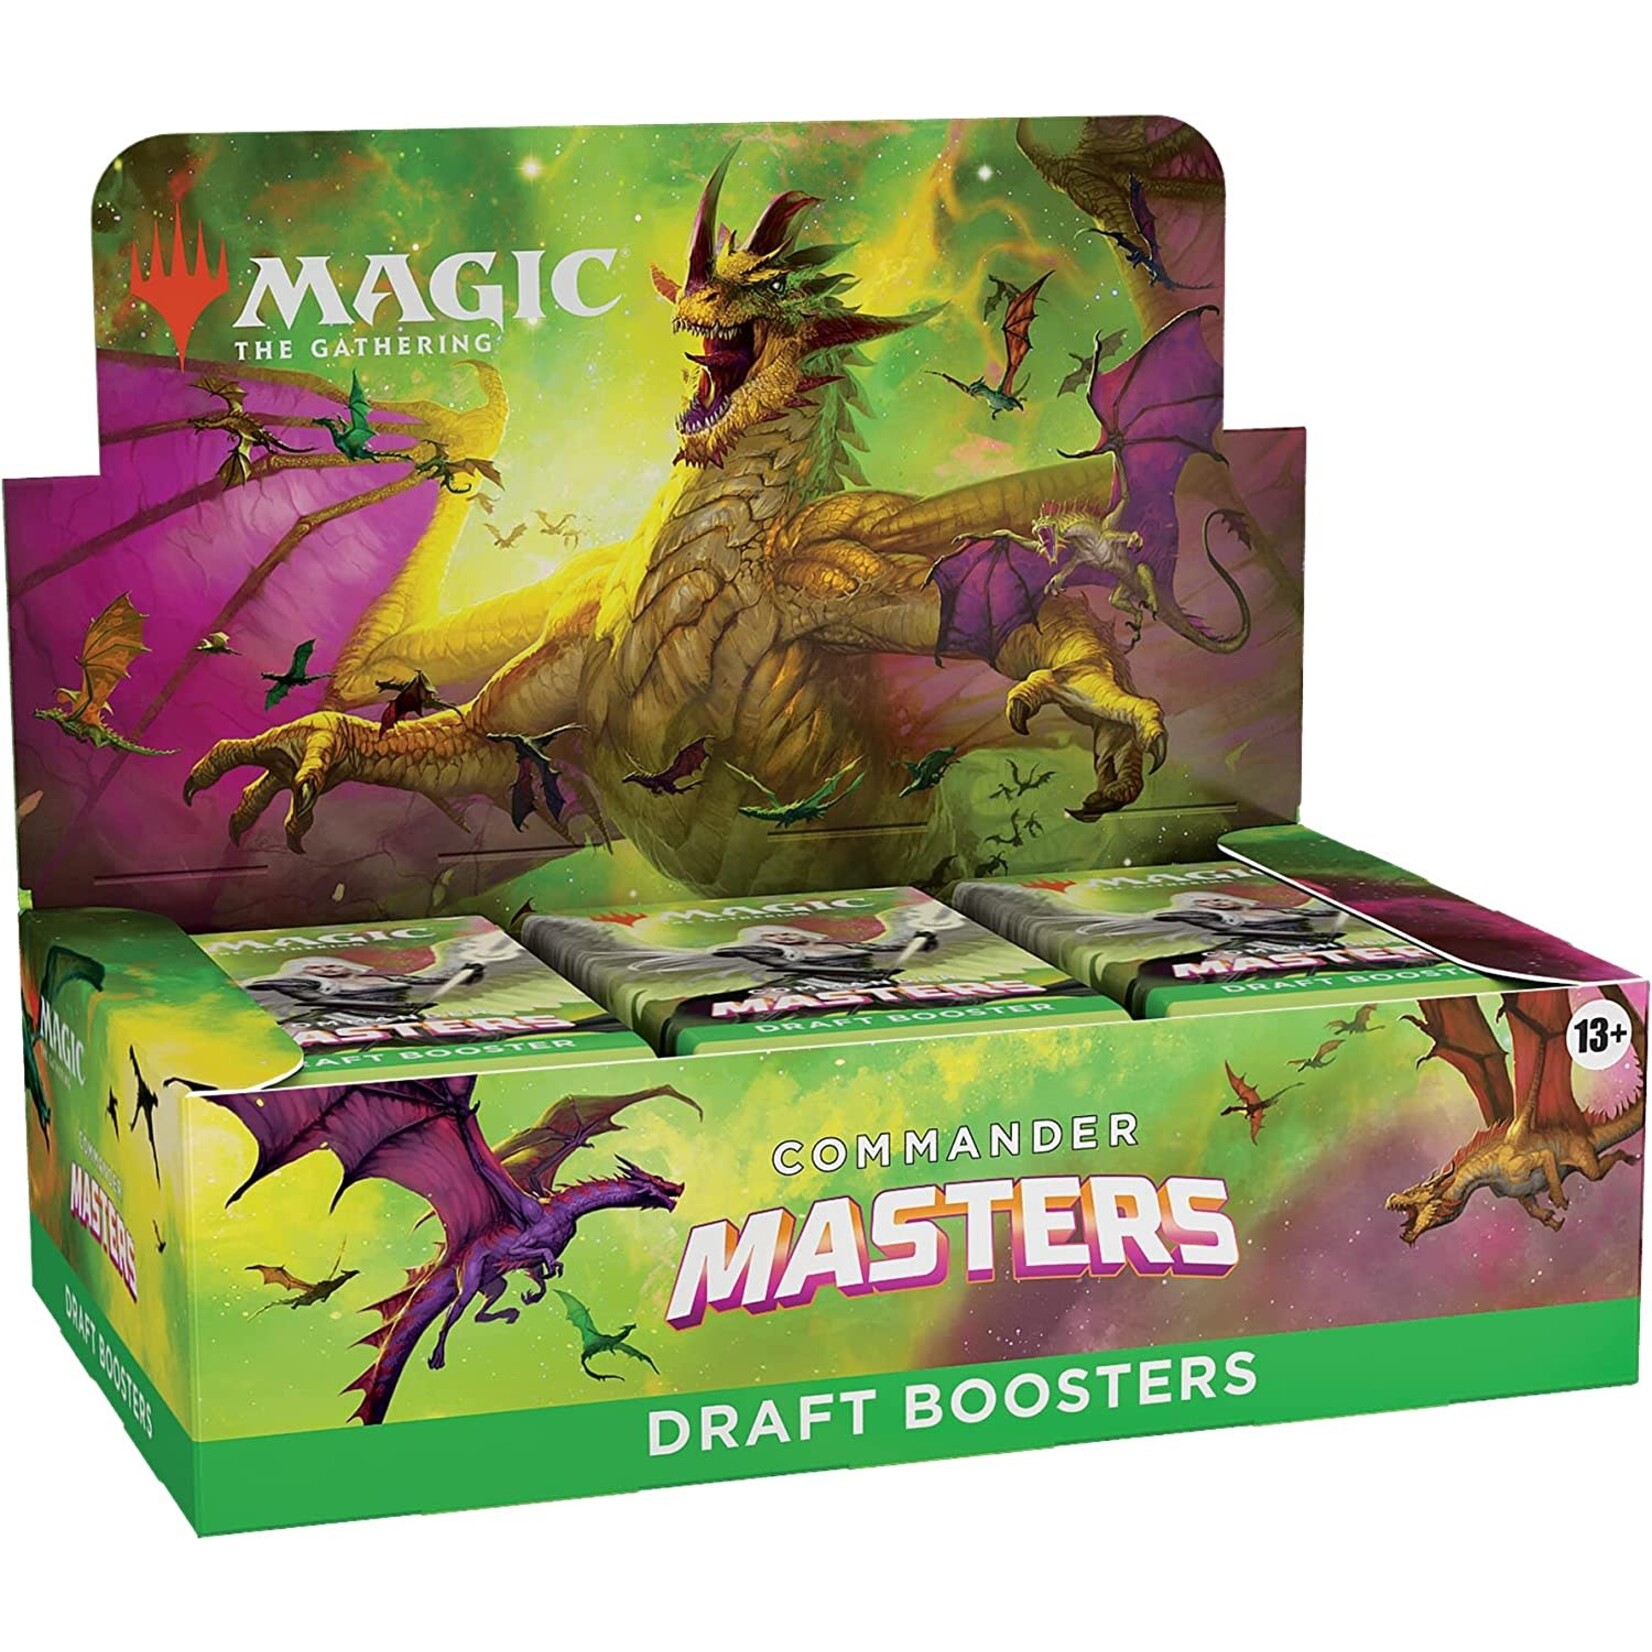 Wizards of the Coast Commander Masters Draft Booster Box